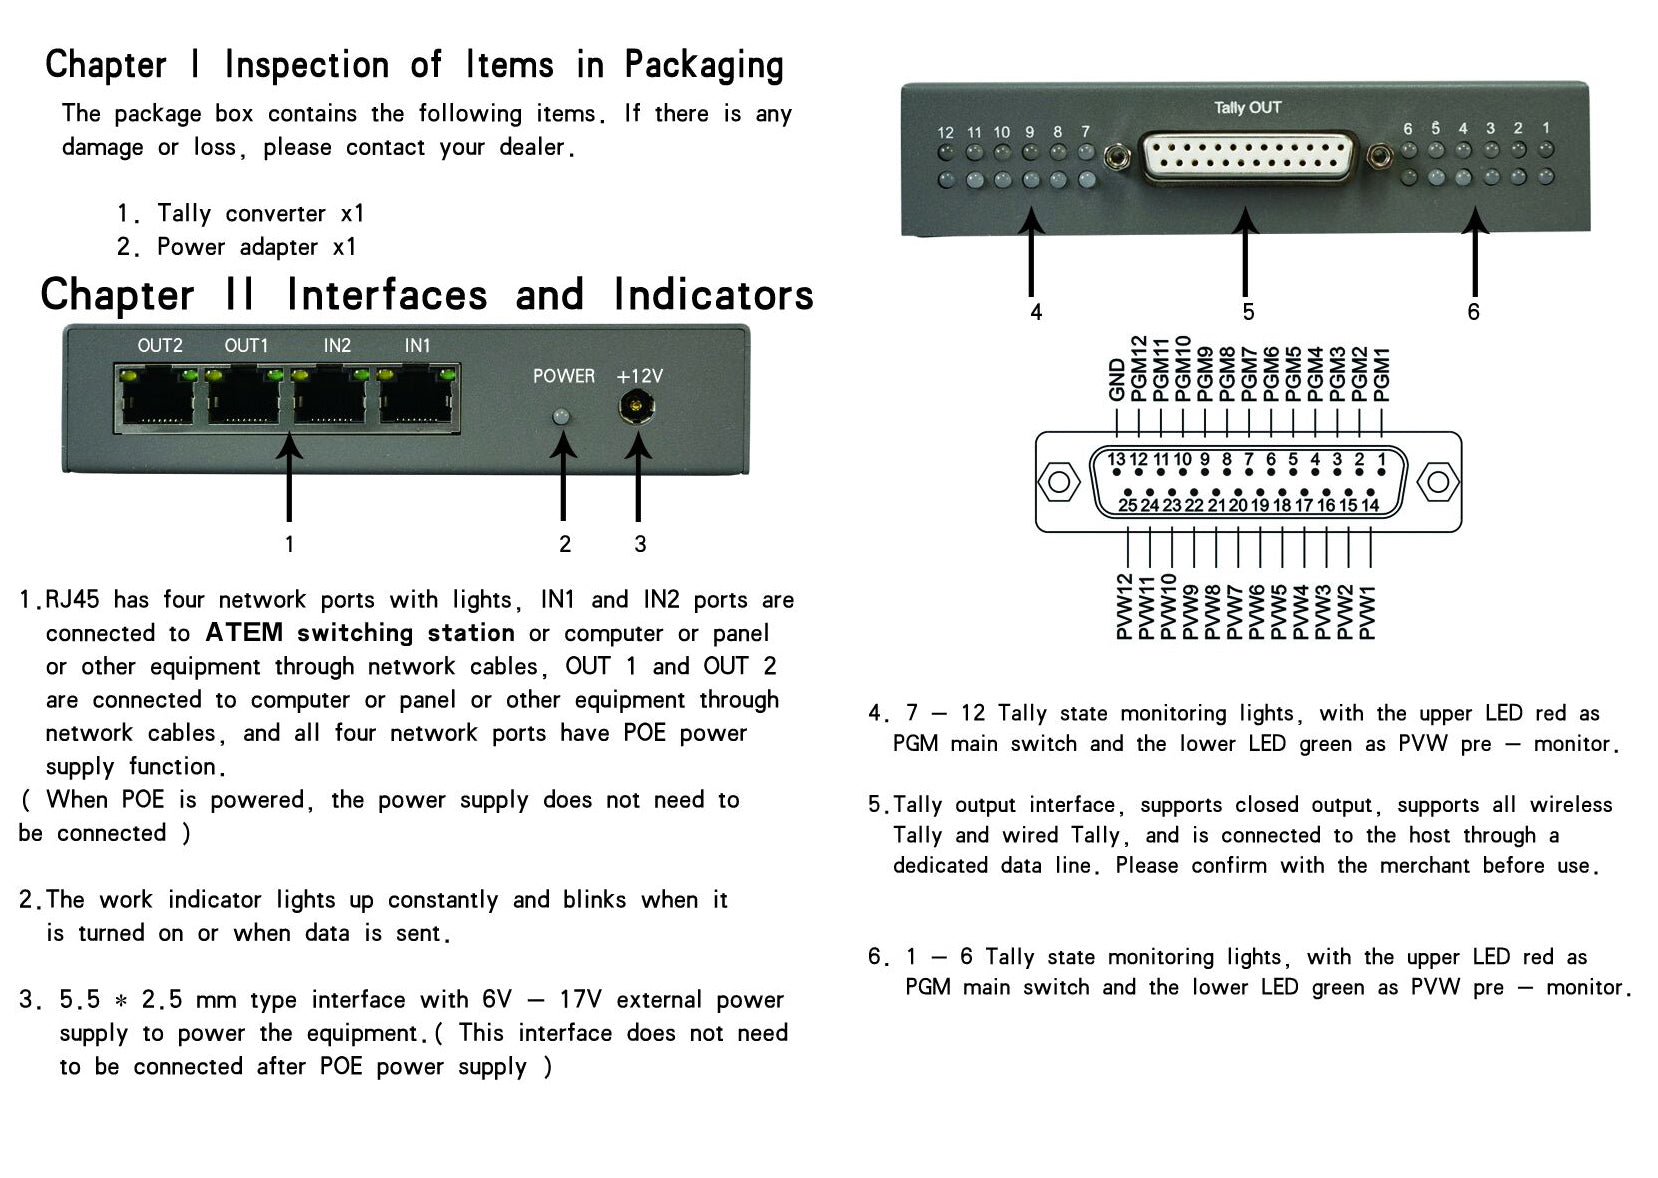 Tally Interface over Ethernet 